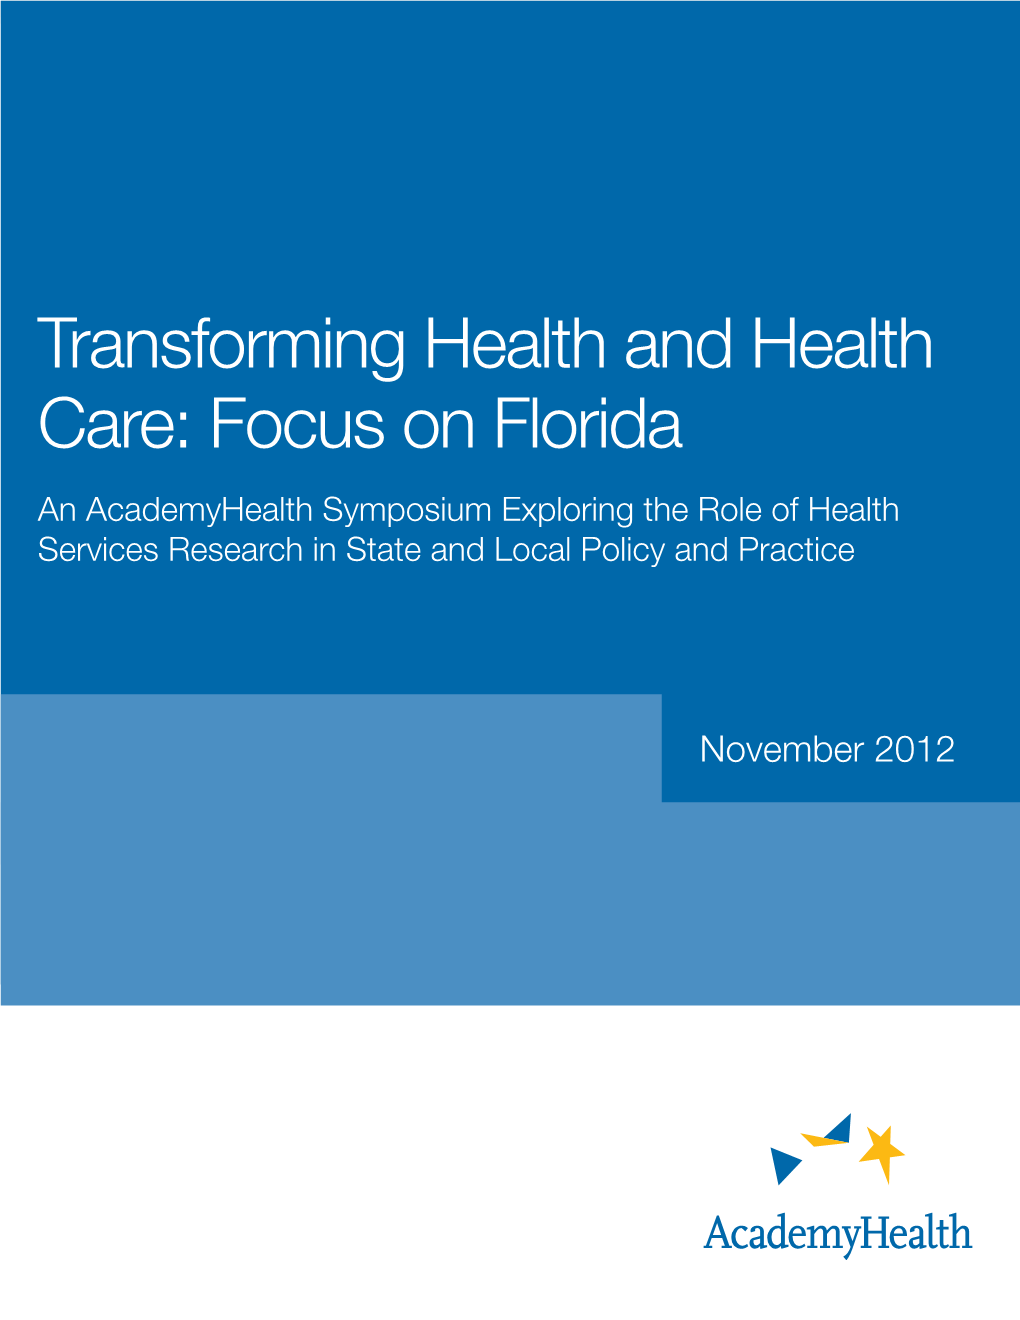 Transforming Health and Health Care: Focus on Florida an Academyhealth Symposium Exploring the Role of Health Services Research in State and Local Policy and Practice